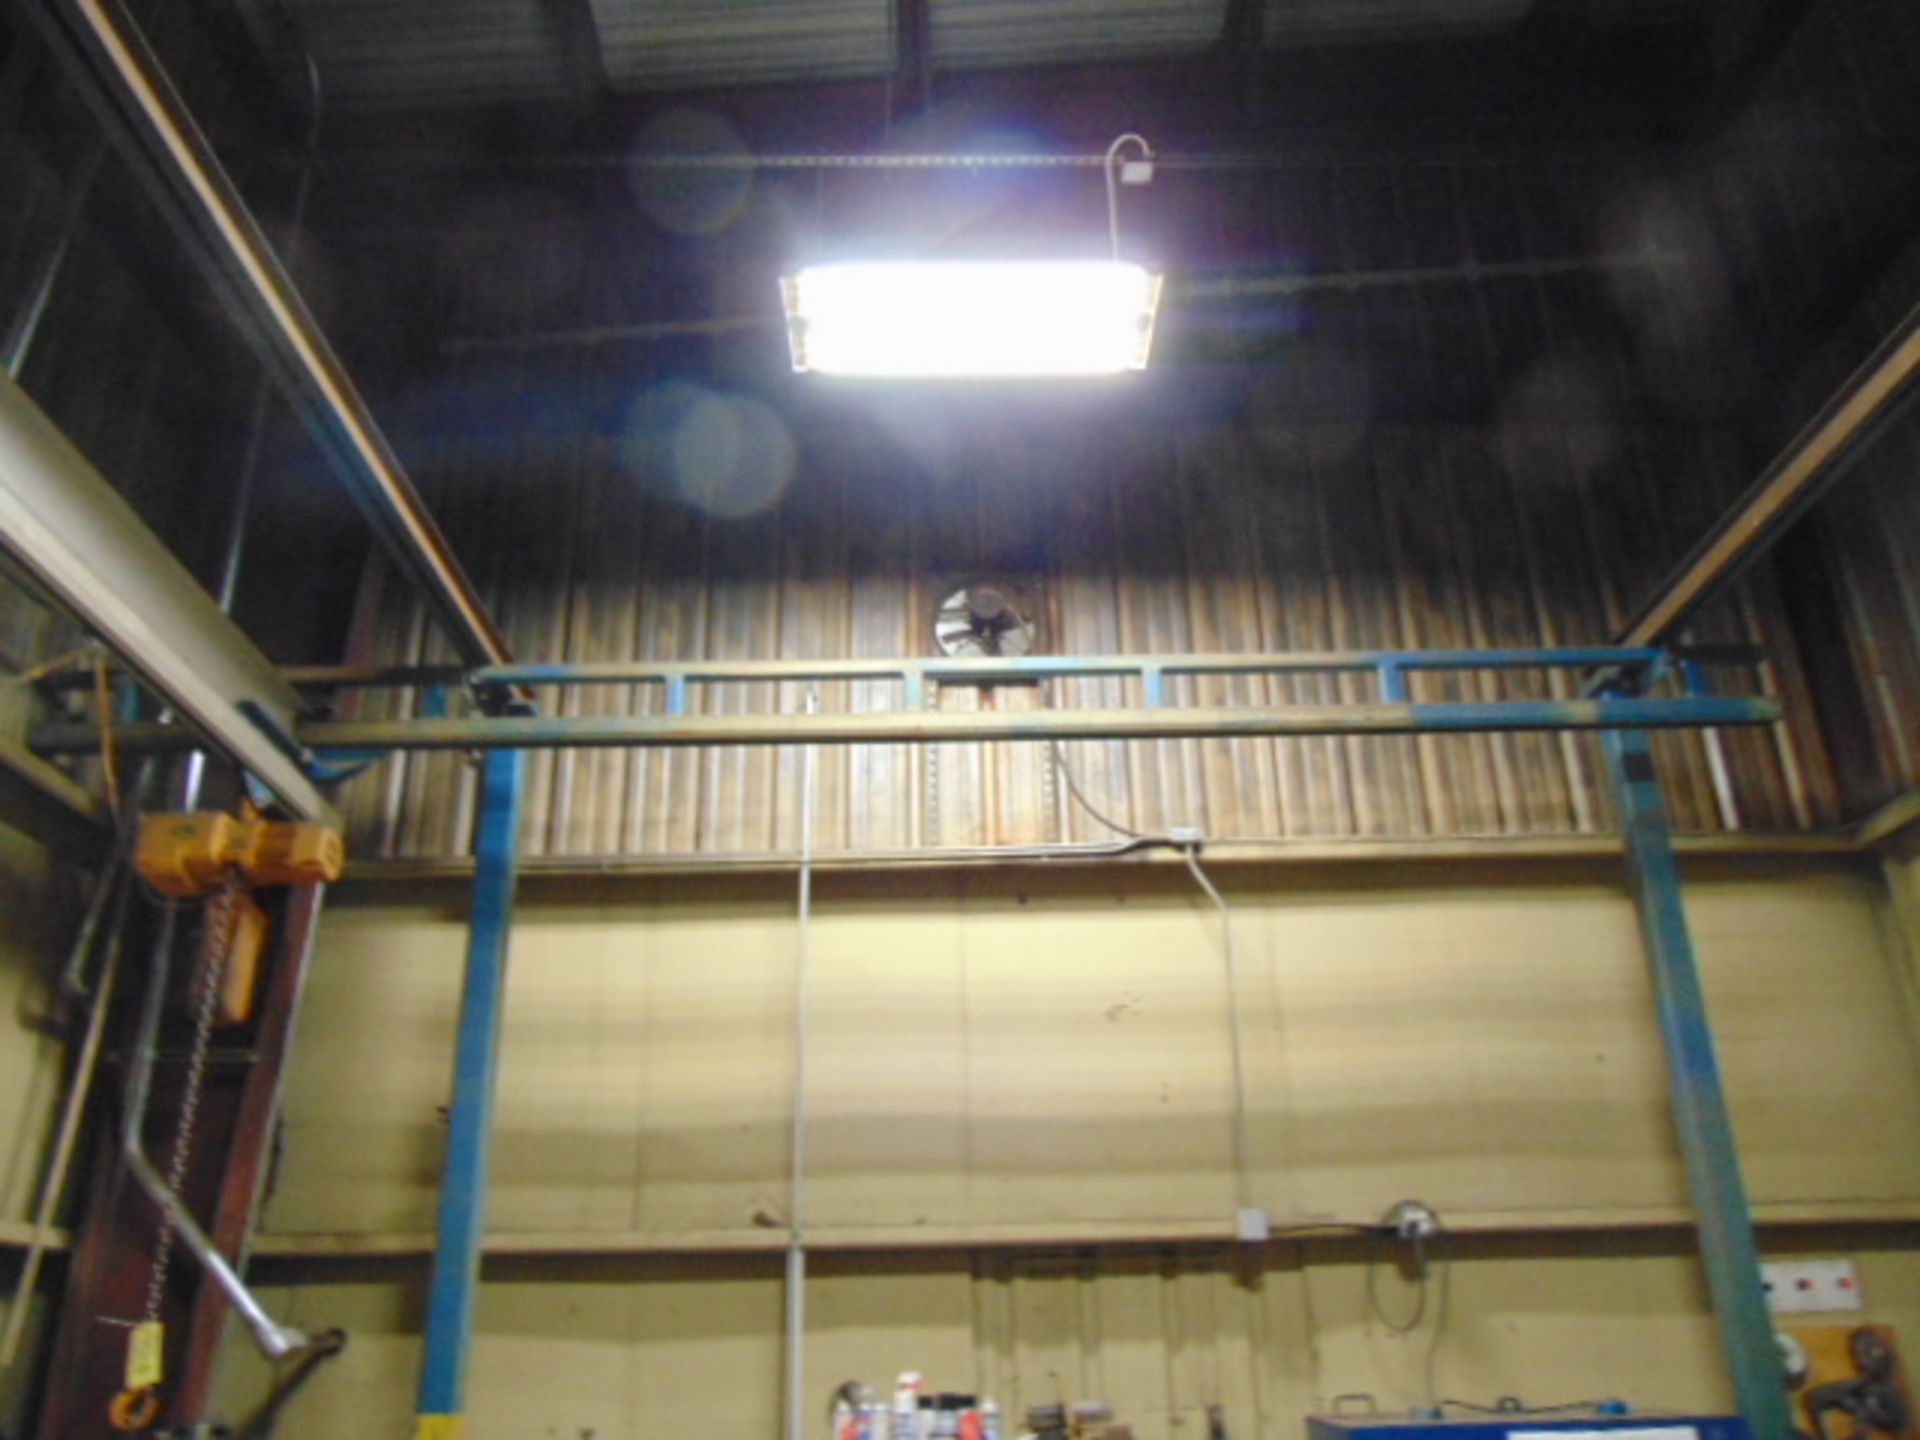 FREE STANDING GANTRY CRANE SYSTEM, GORBEL 2,000 LB. CAP., approx. 20'W. x 20'L., approx. 10' under - Image 8 of 9